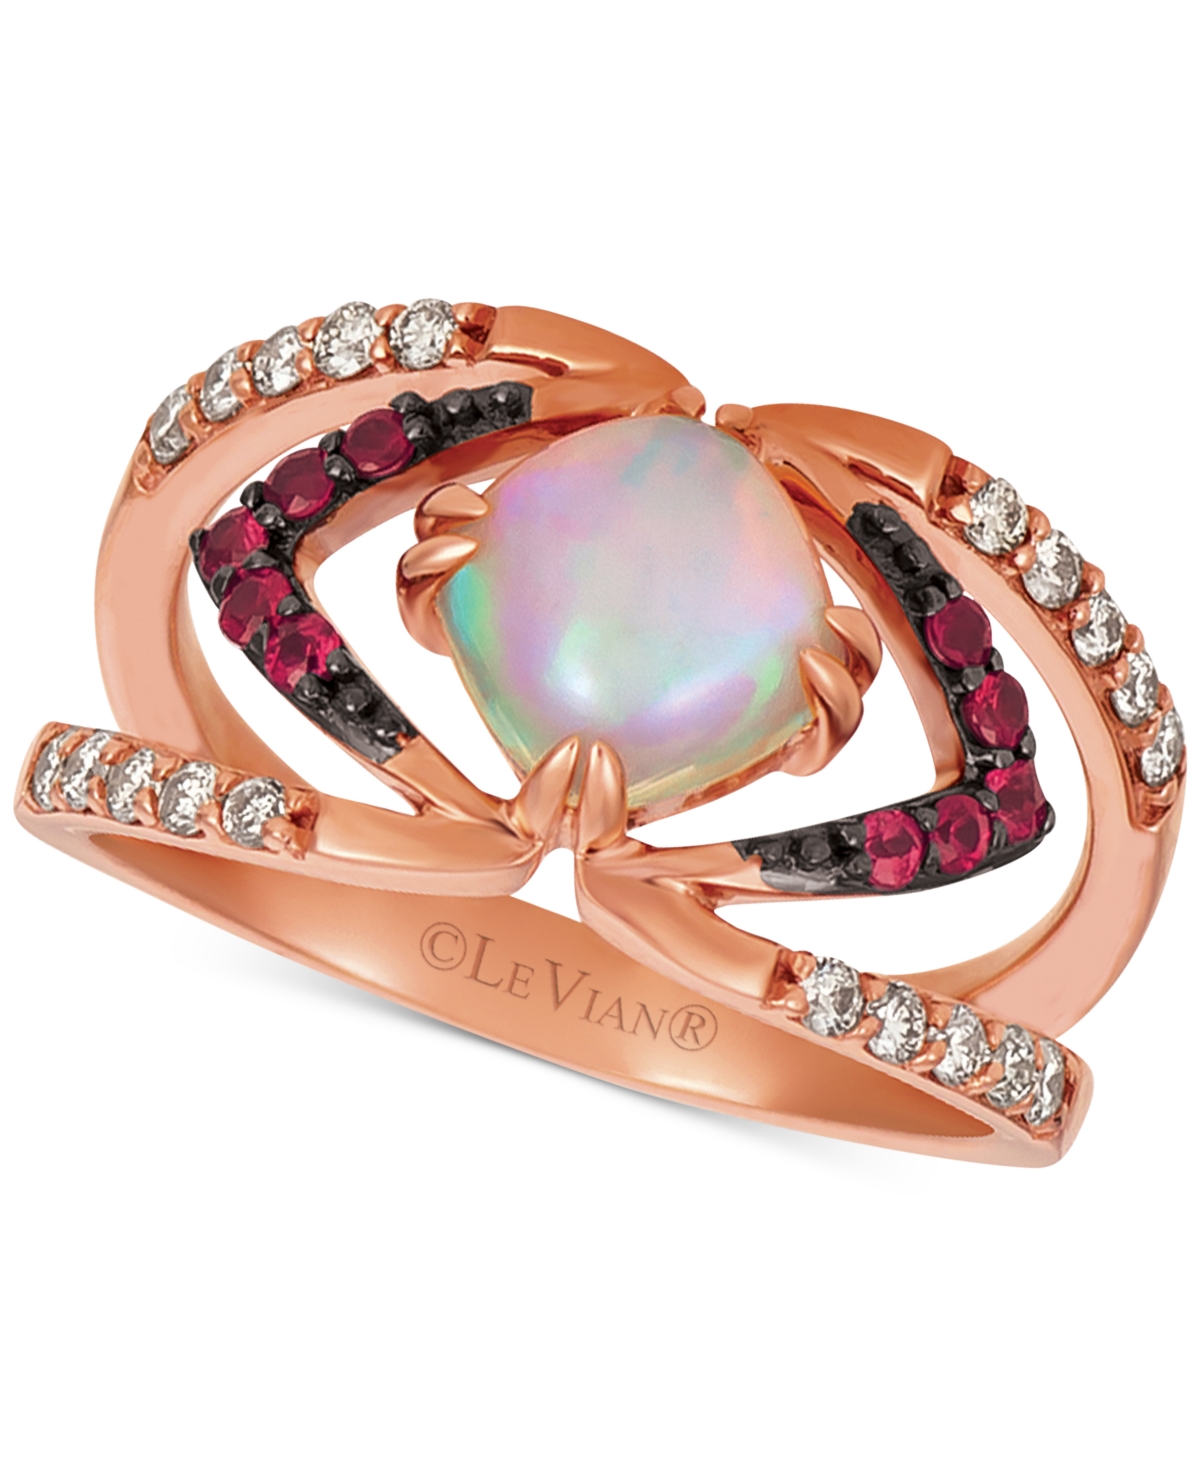 Le Vian Neopolitan Opal (3/4 Ct. T.w.), Passion Ruby (1/6 Ct. T.w.), & Nude Diamonds (1/4 Ct. T.w.) Ring Set In Opal,passion Ruby